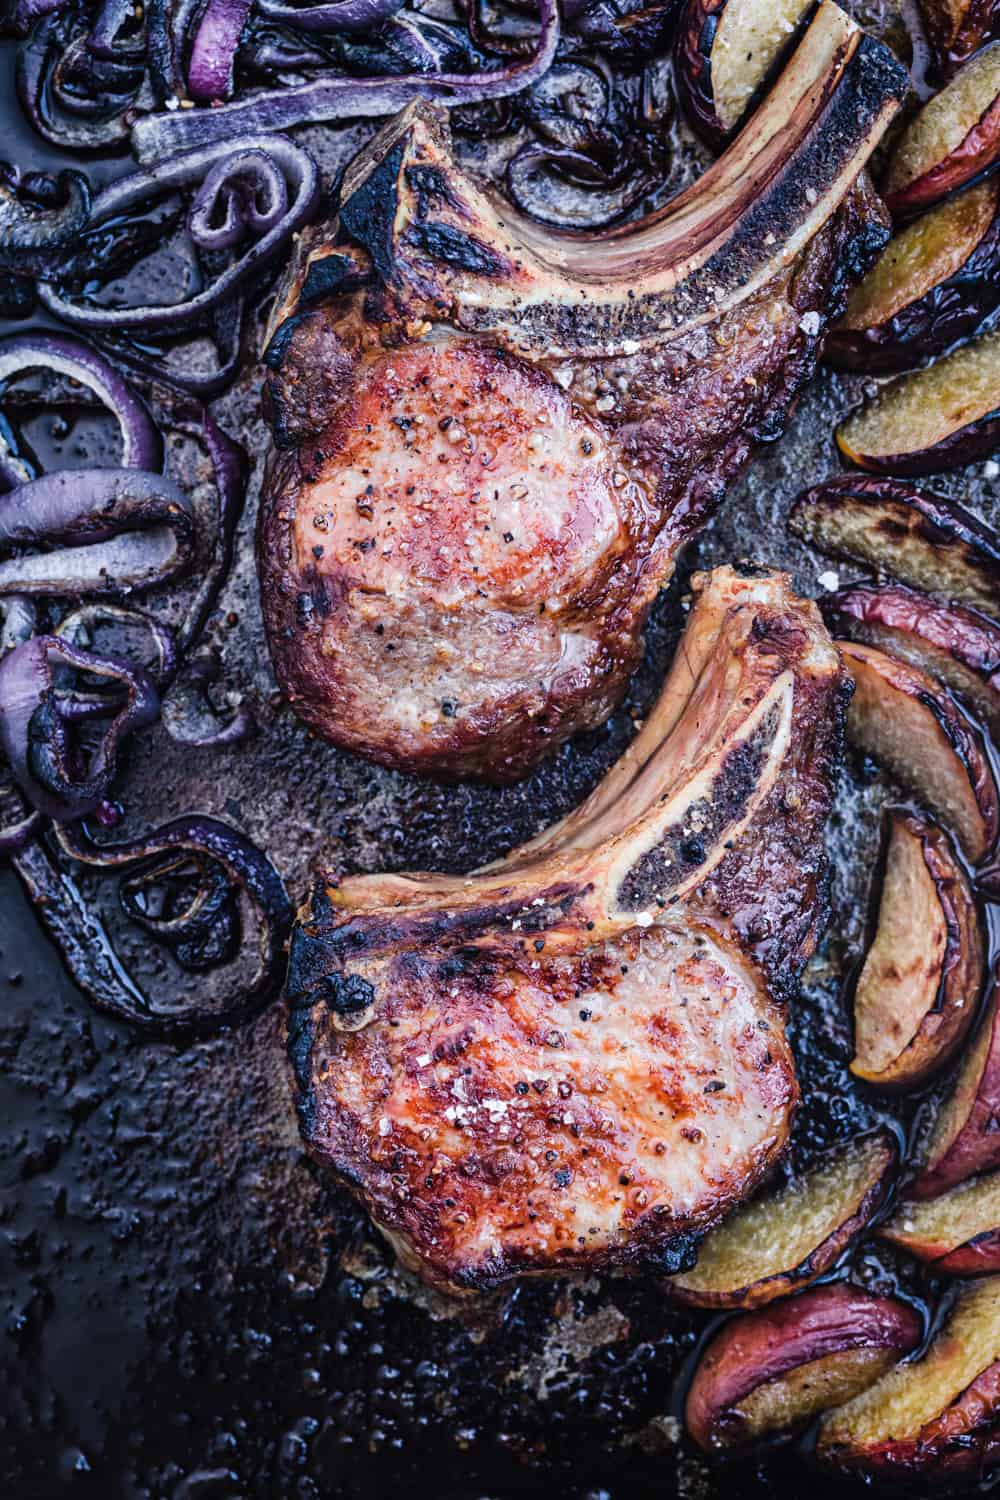 Sheet pan with bone-in pork chops, peaches and onions just out of the oven, overhead shot.